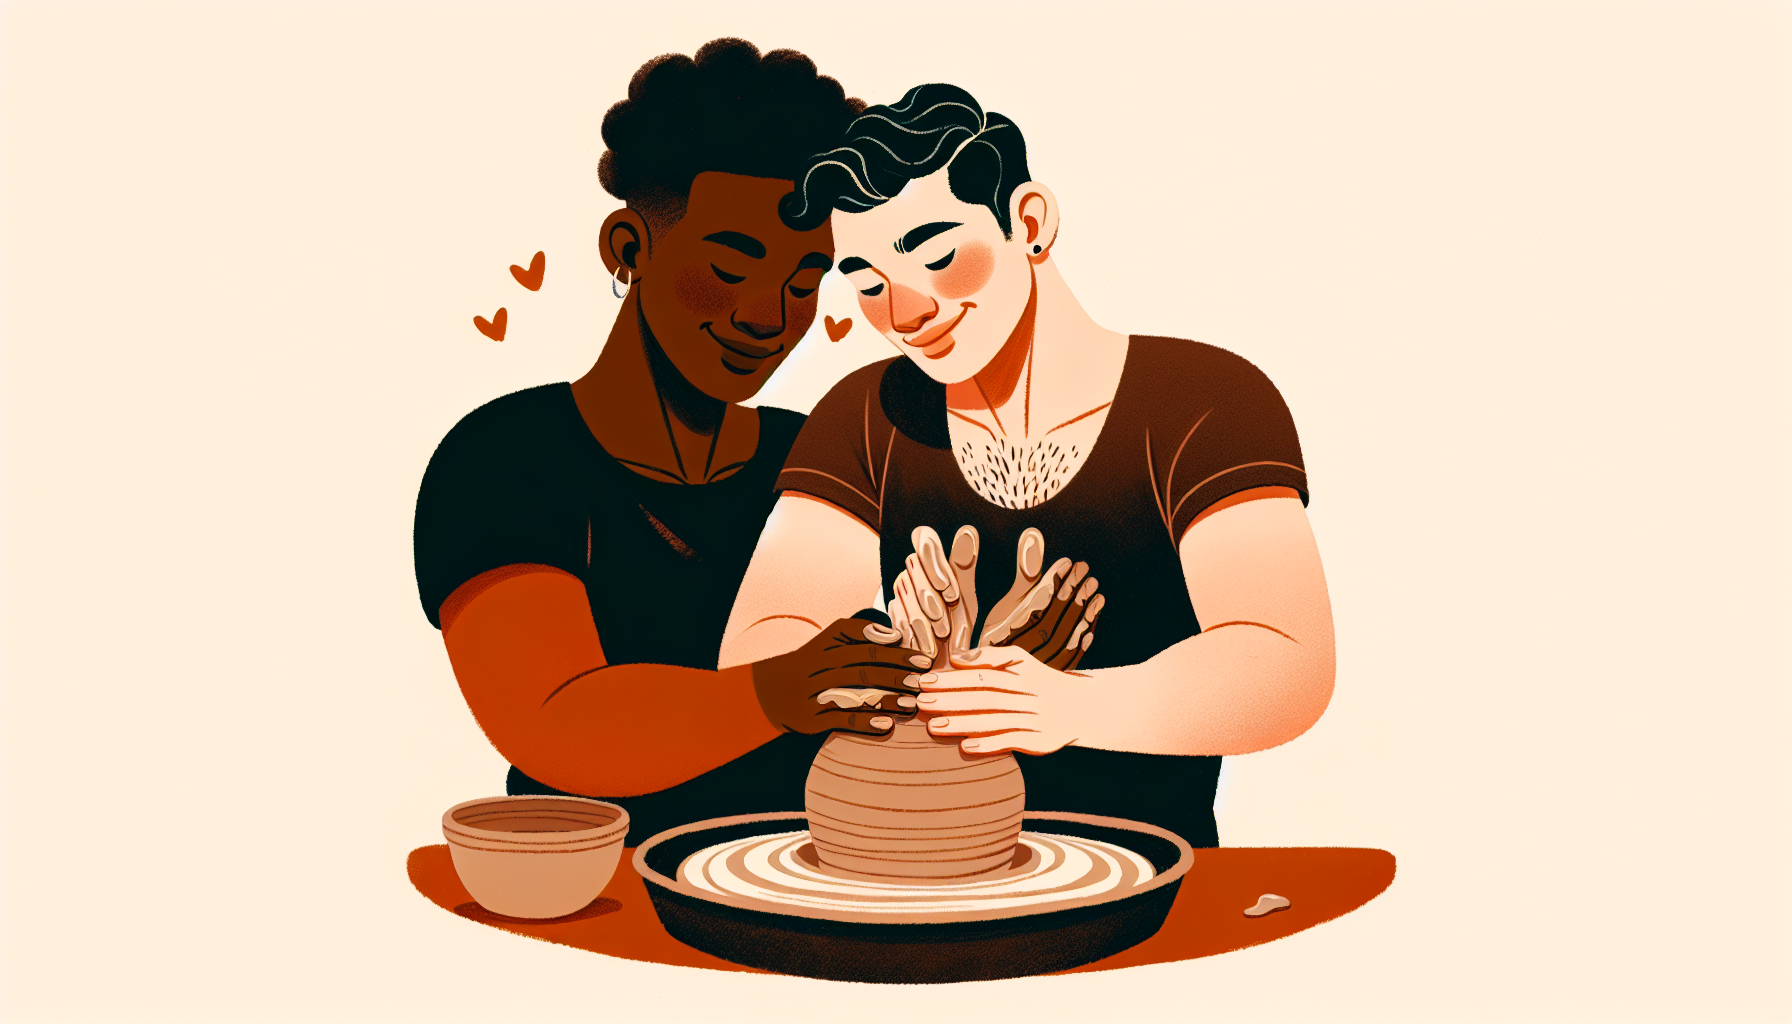 Illustration of a diverse gay couple spending quality time together